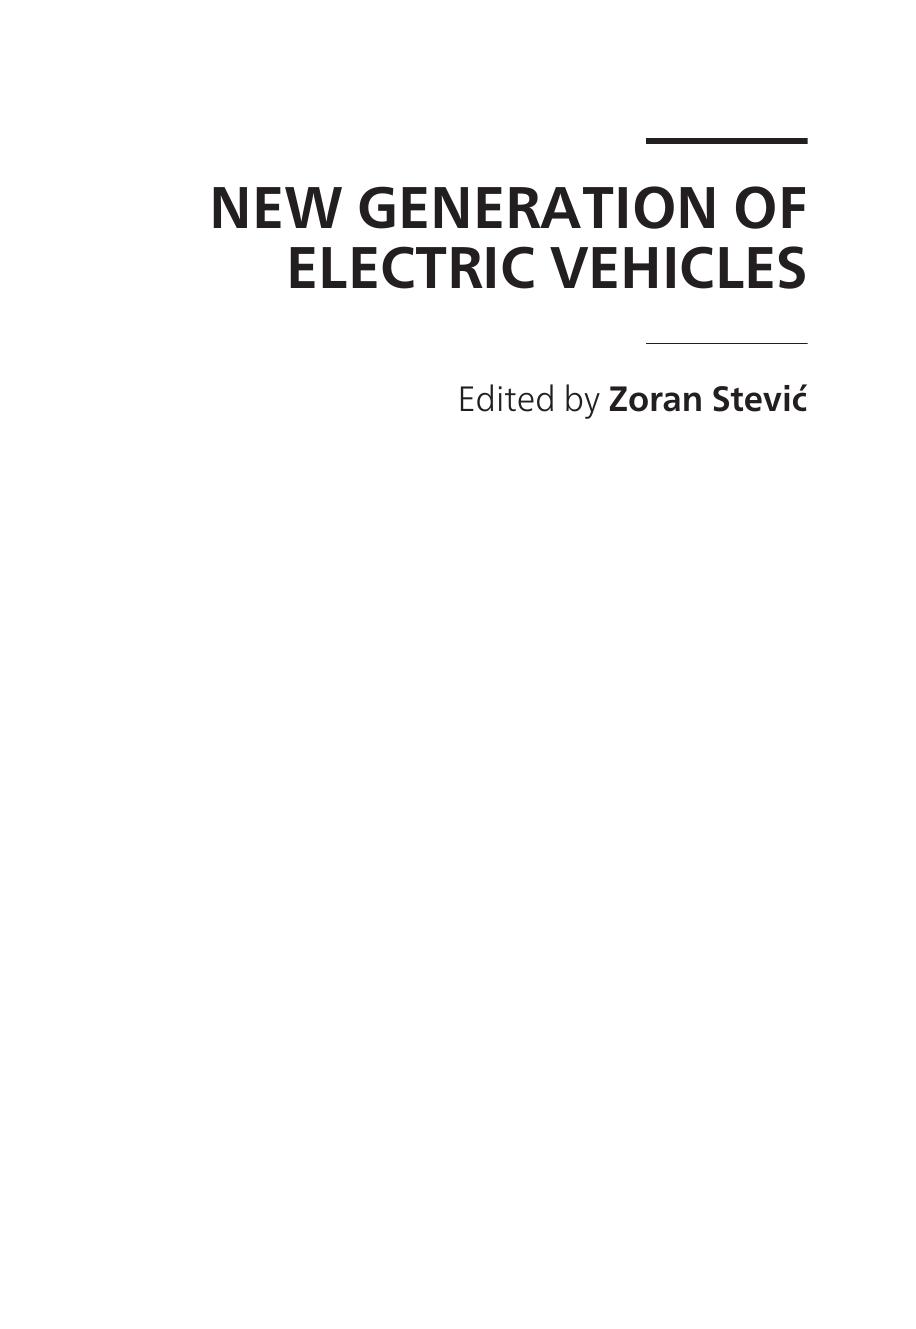 New Generation of Electric Vehicles 2012.pdf